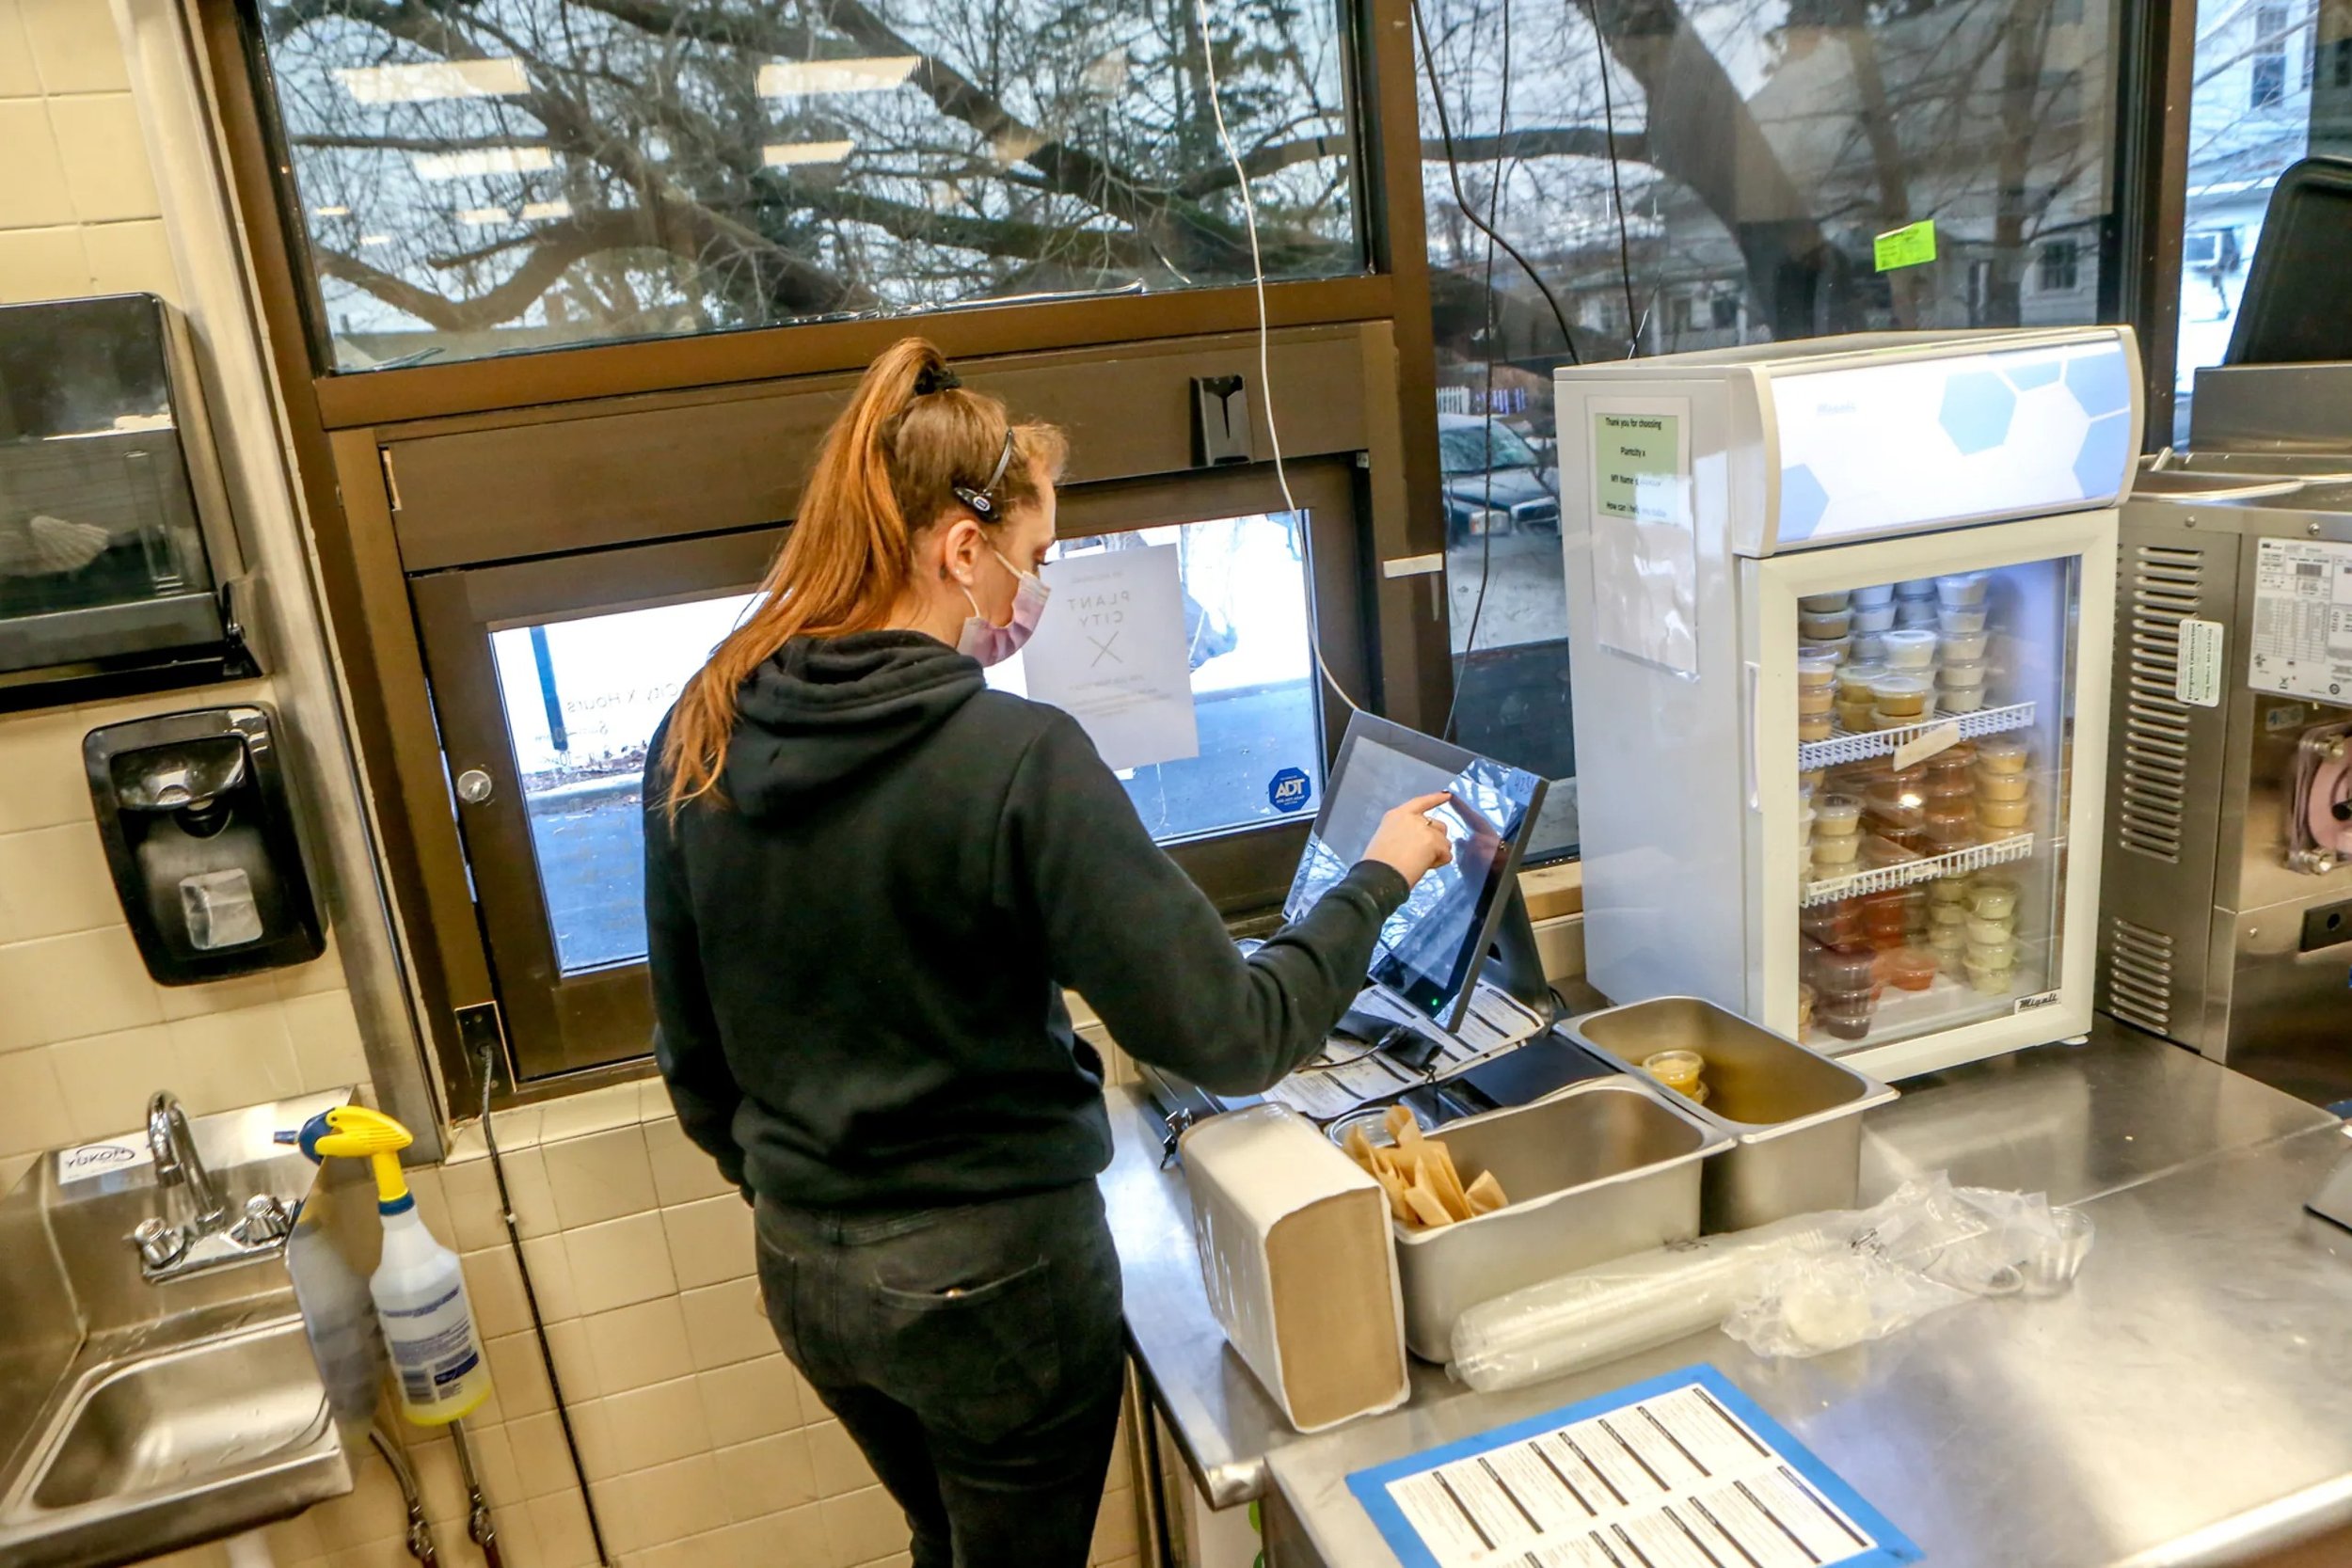  Customers can order at the counter and eat inside the dining room. Or they can order and pick up at the drive-thru window. Photo credit David DelPoio, The Providence Journal 